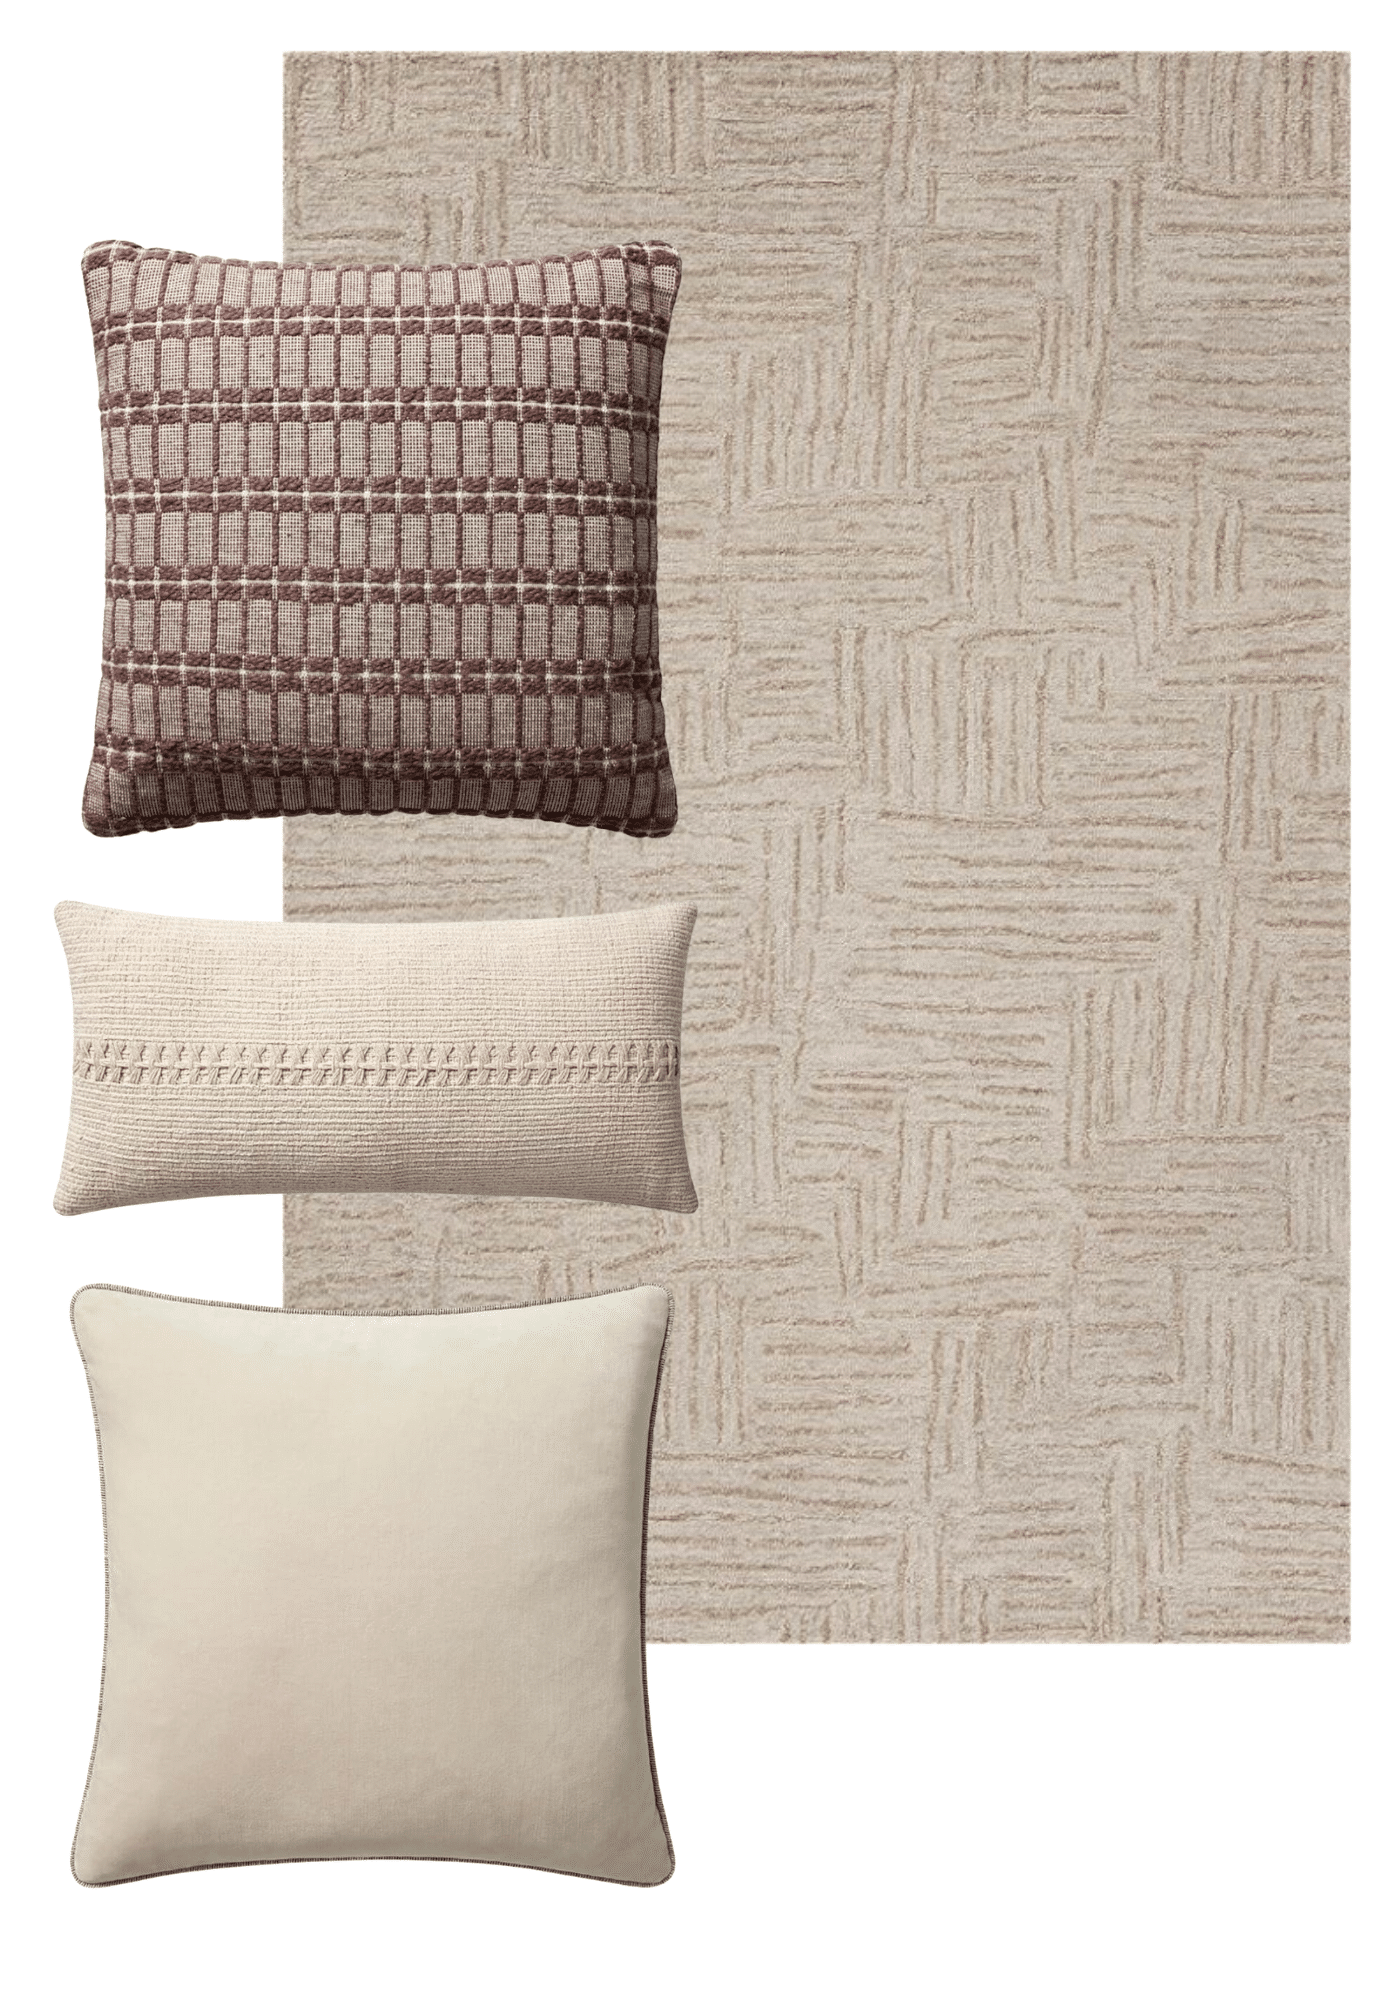 Chris Loves Julia | My Favorite Pillow & Rug Pairings | Polly Rug in Smoke Sand with Pillows